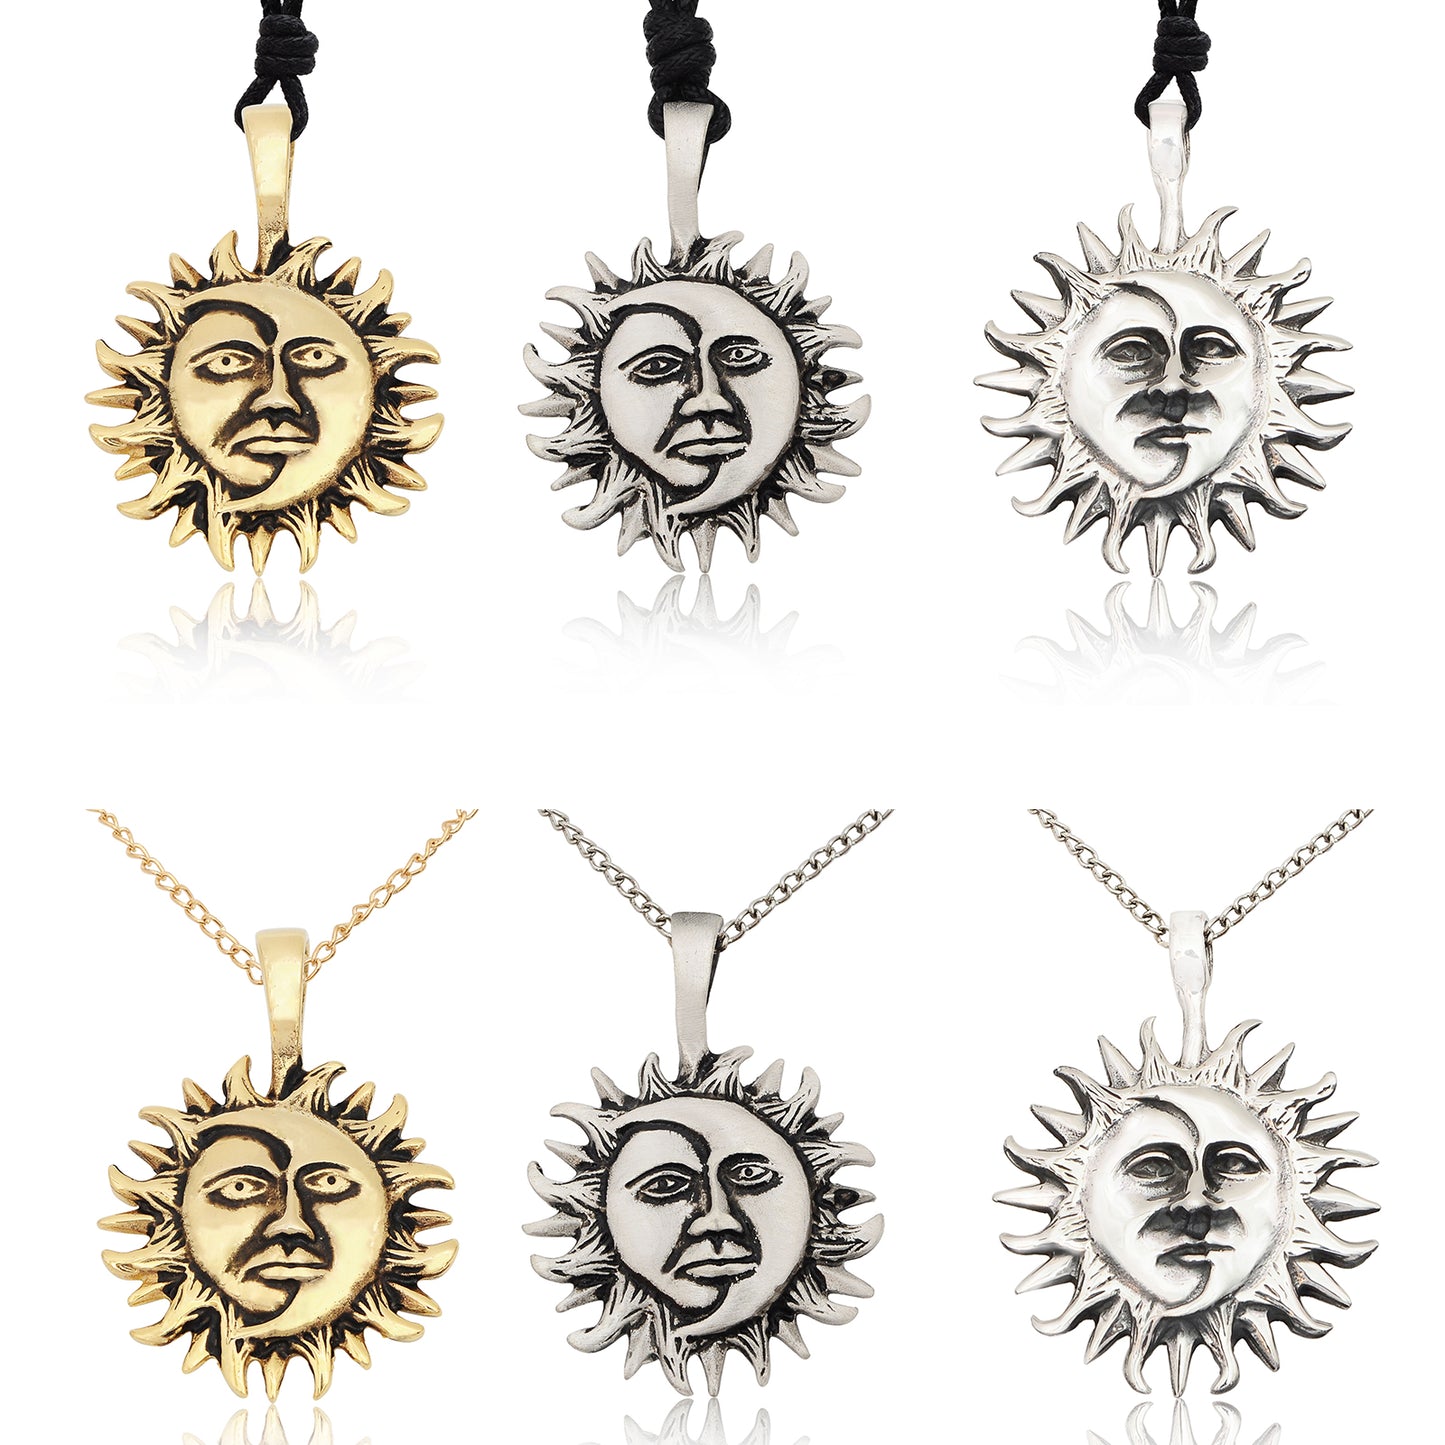 New Ying Yang Sun And Moon  92.5 Sterling Silver Charm Necklace Pendant Jewelry